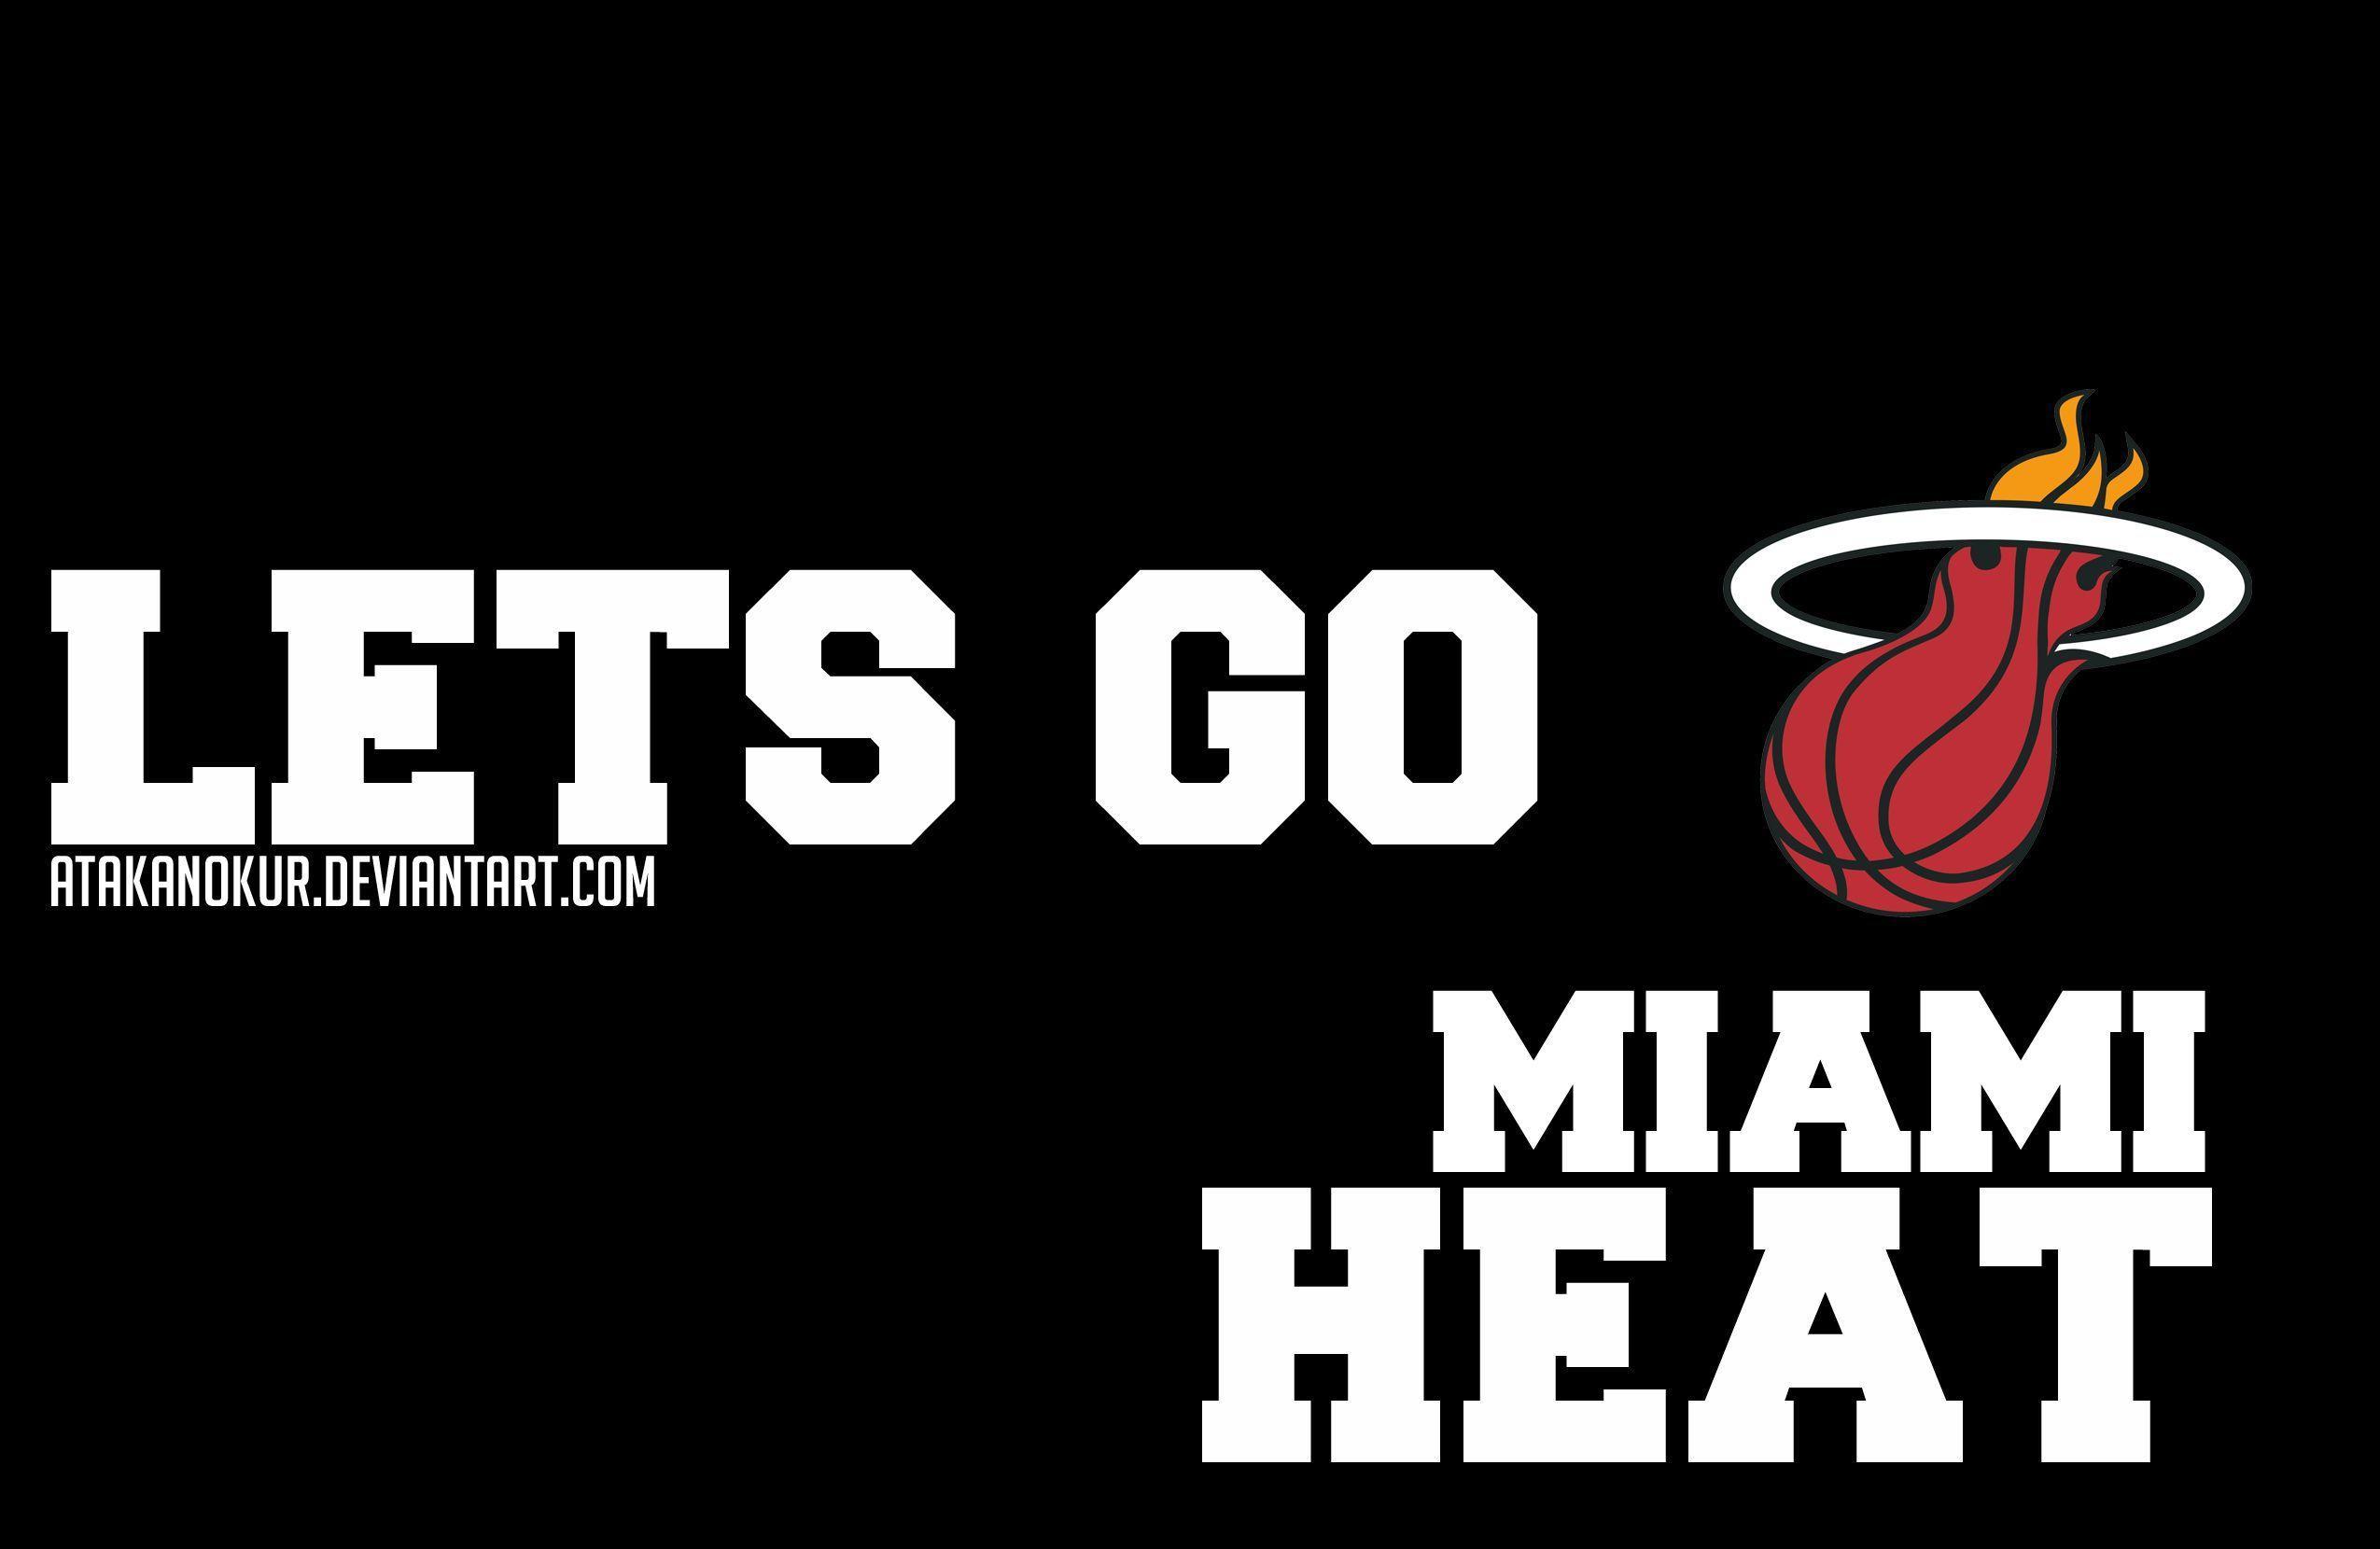 Lets Go Miami Heat Wallpapers